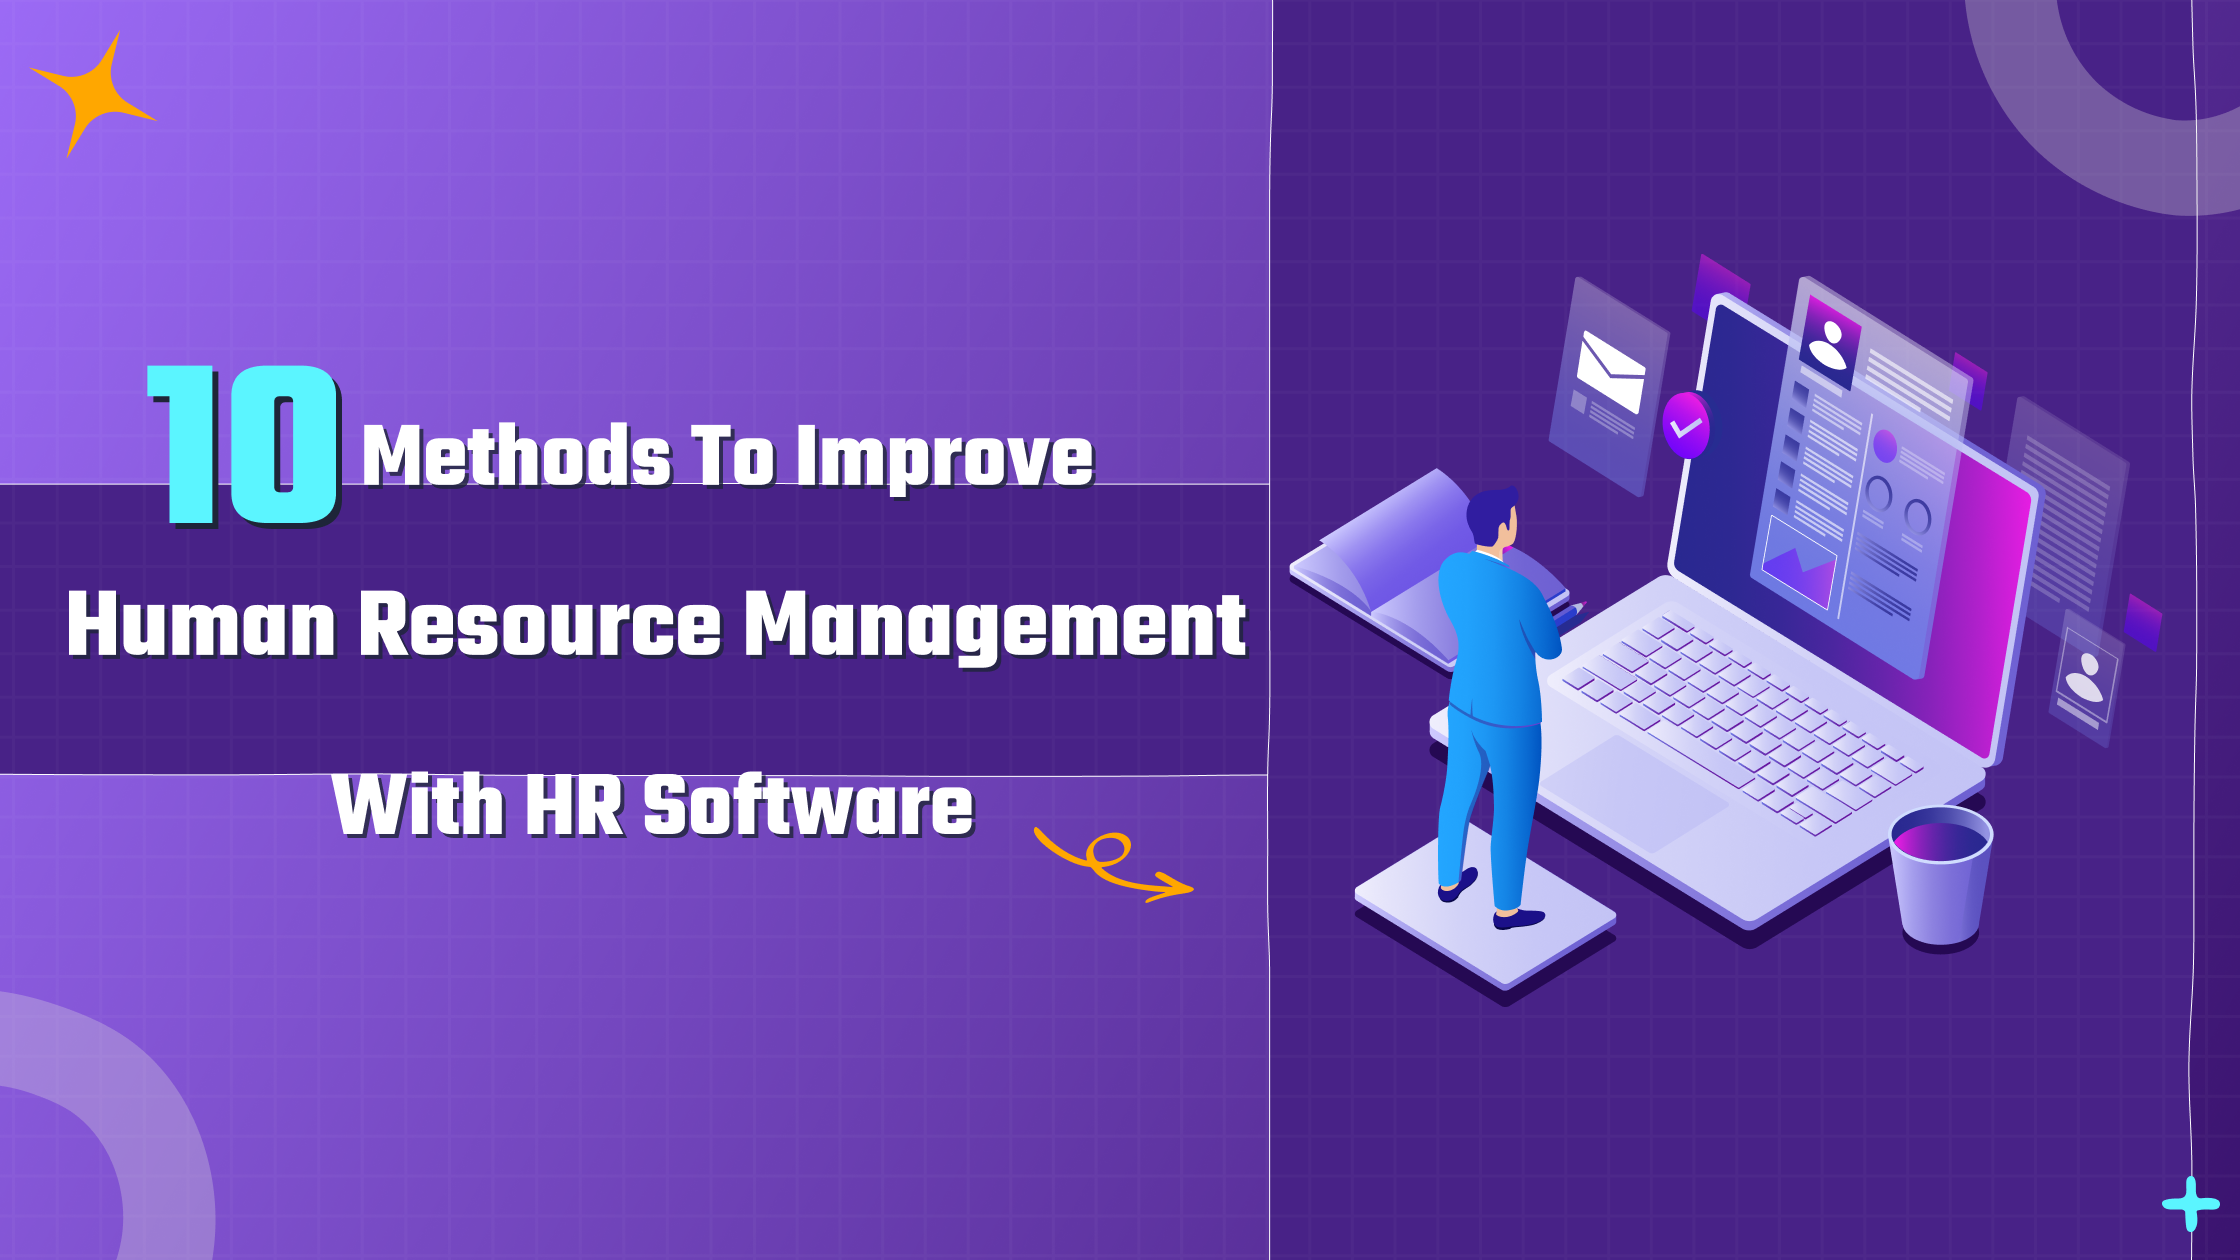 10 Methods To Improve Human Resource Management With HR Software